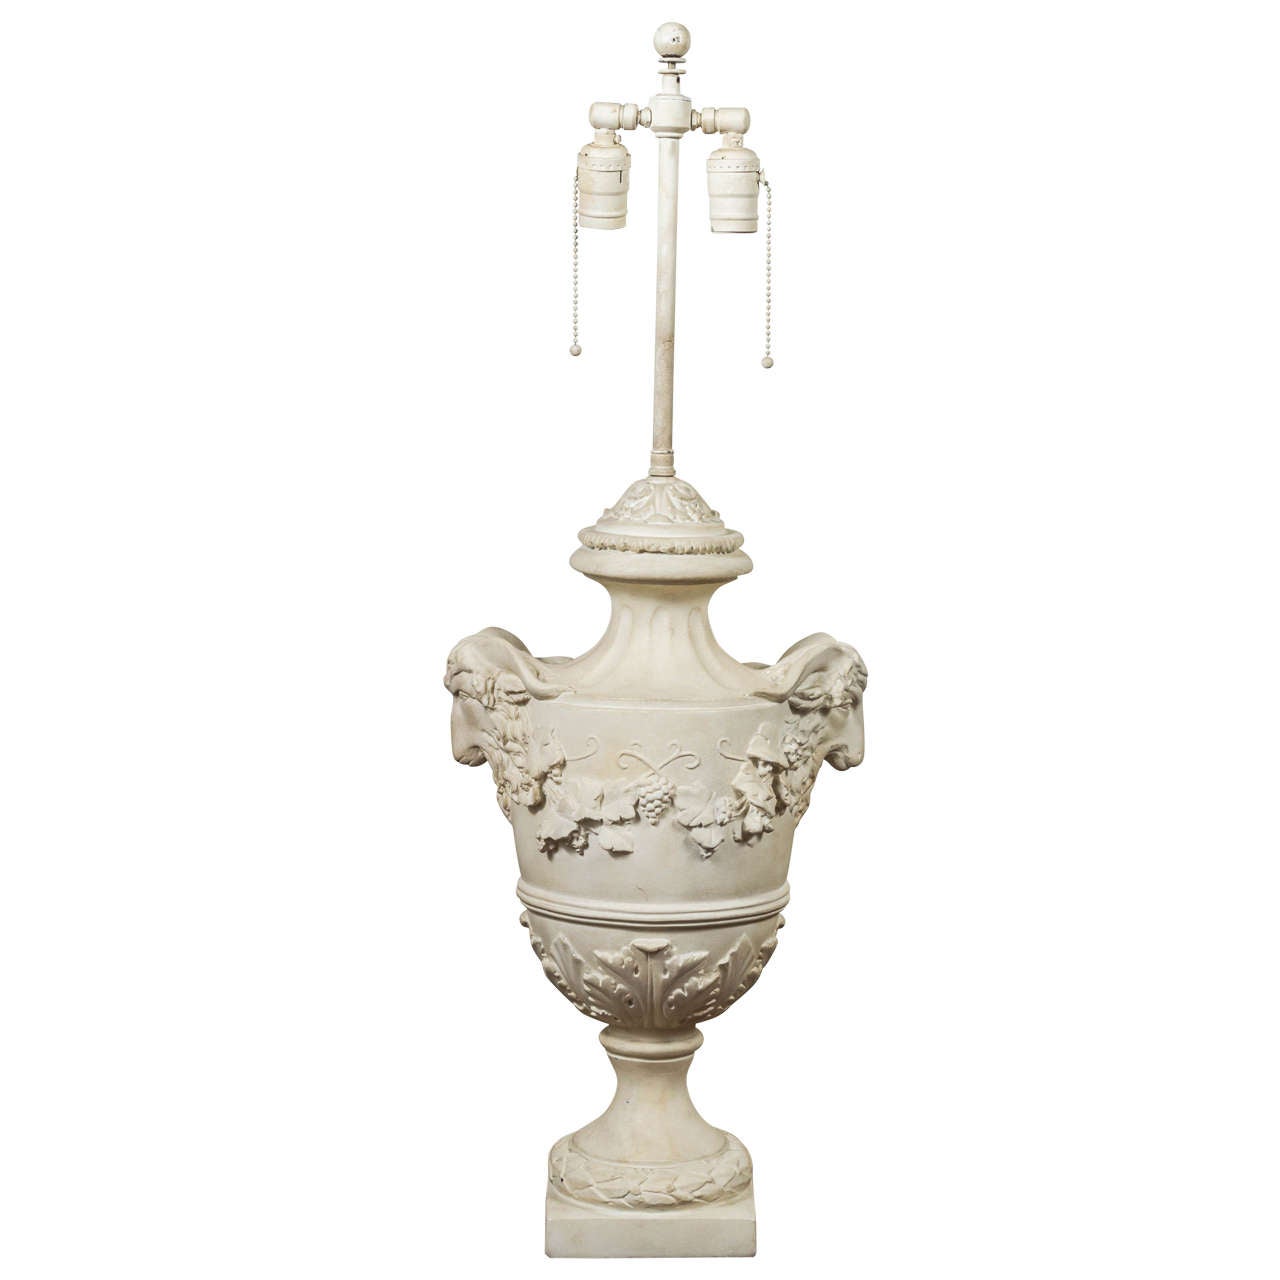 Lovely Neoclassical Form Embellished Urn as a Table Lamp